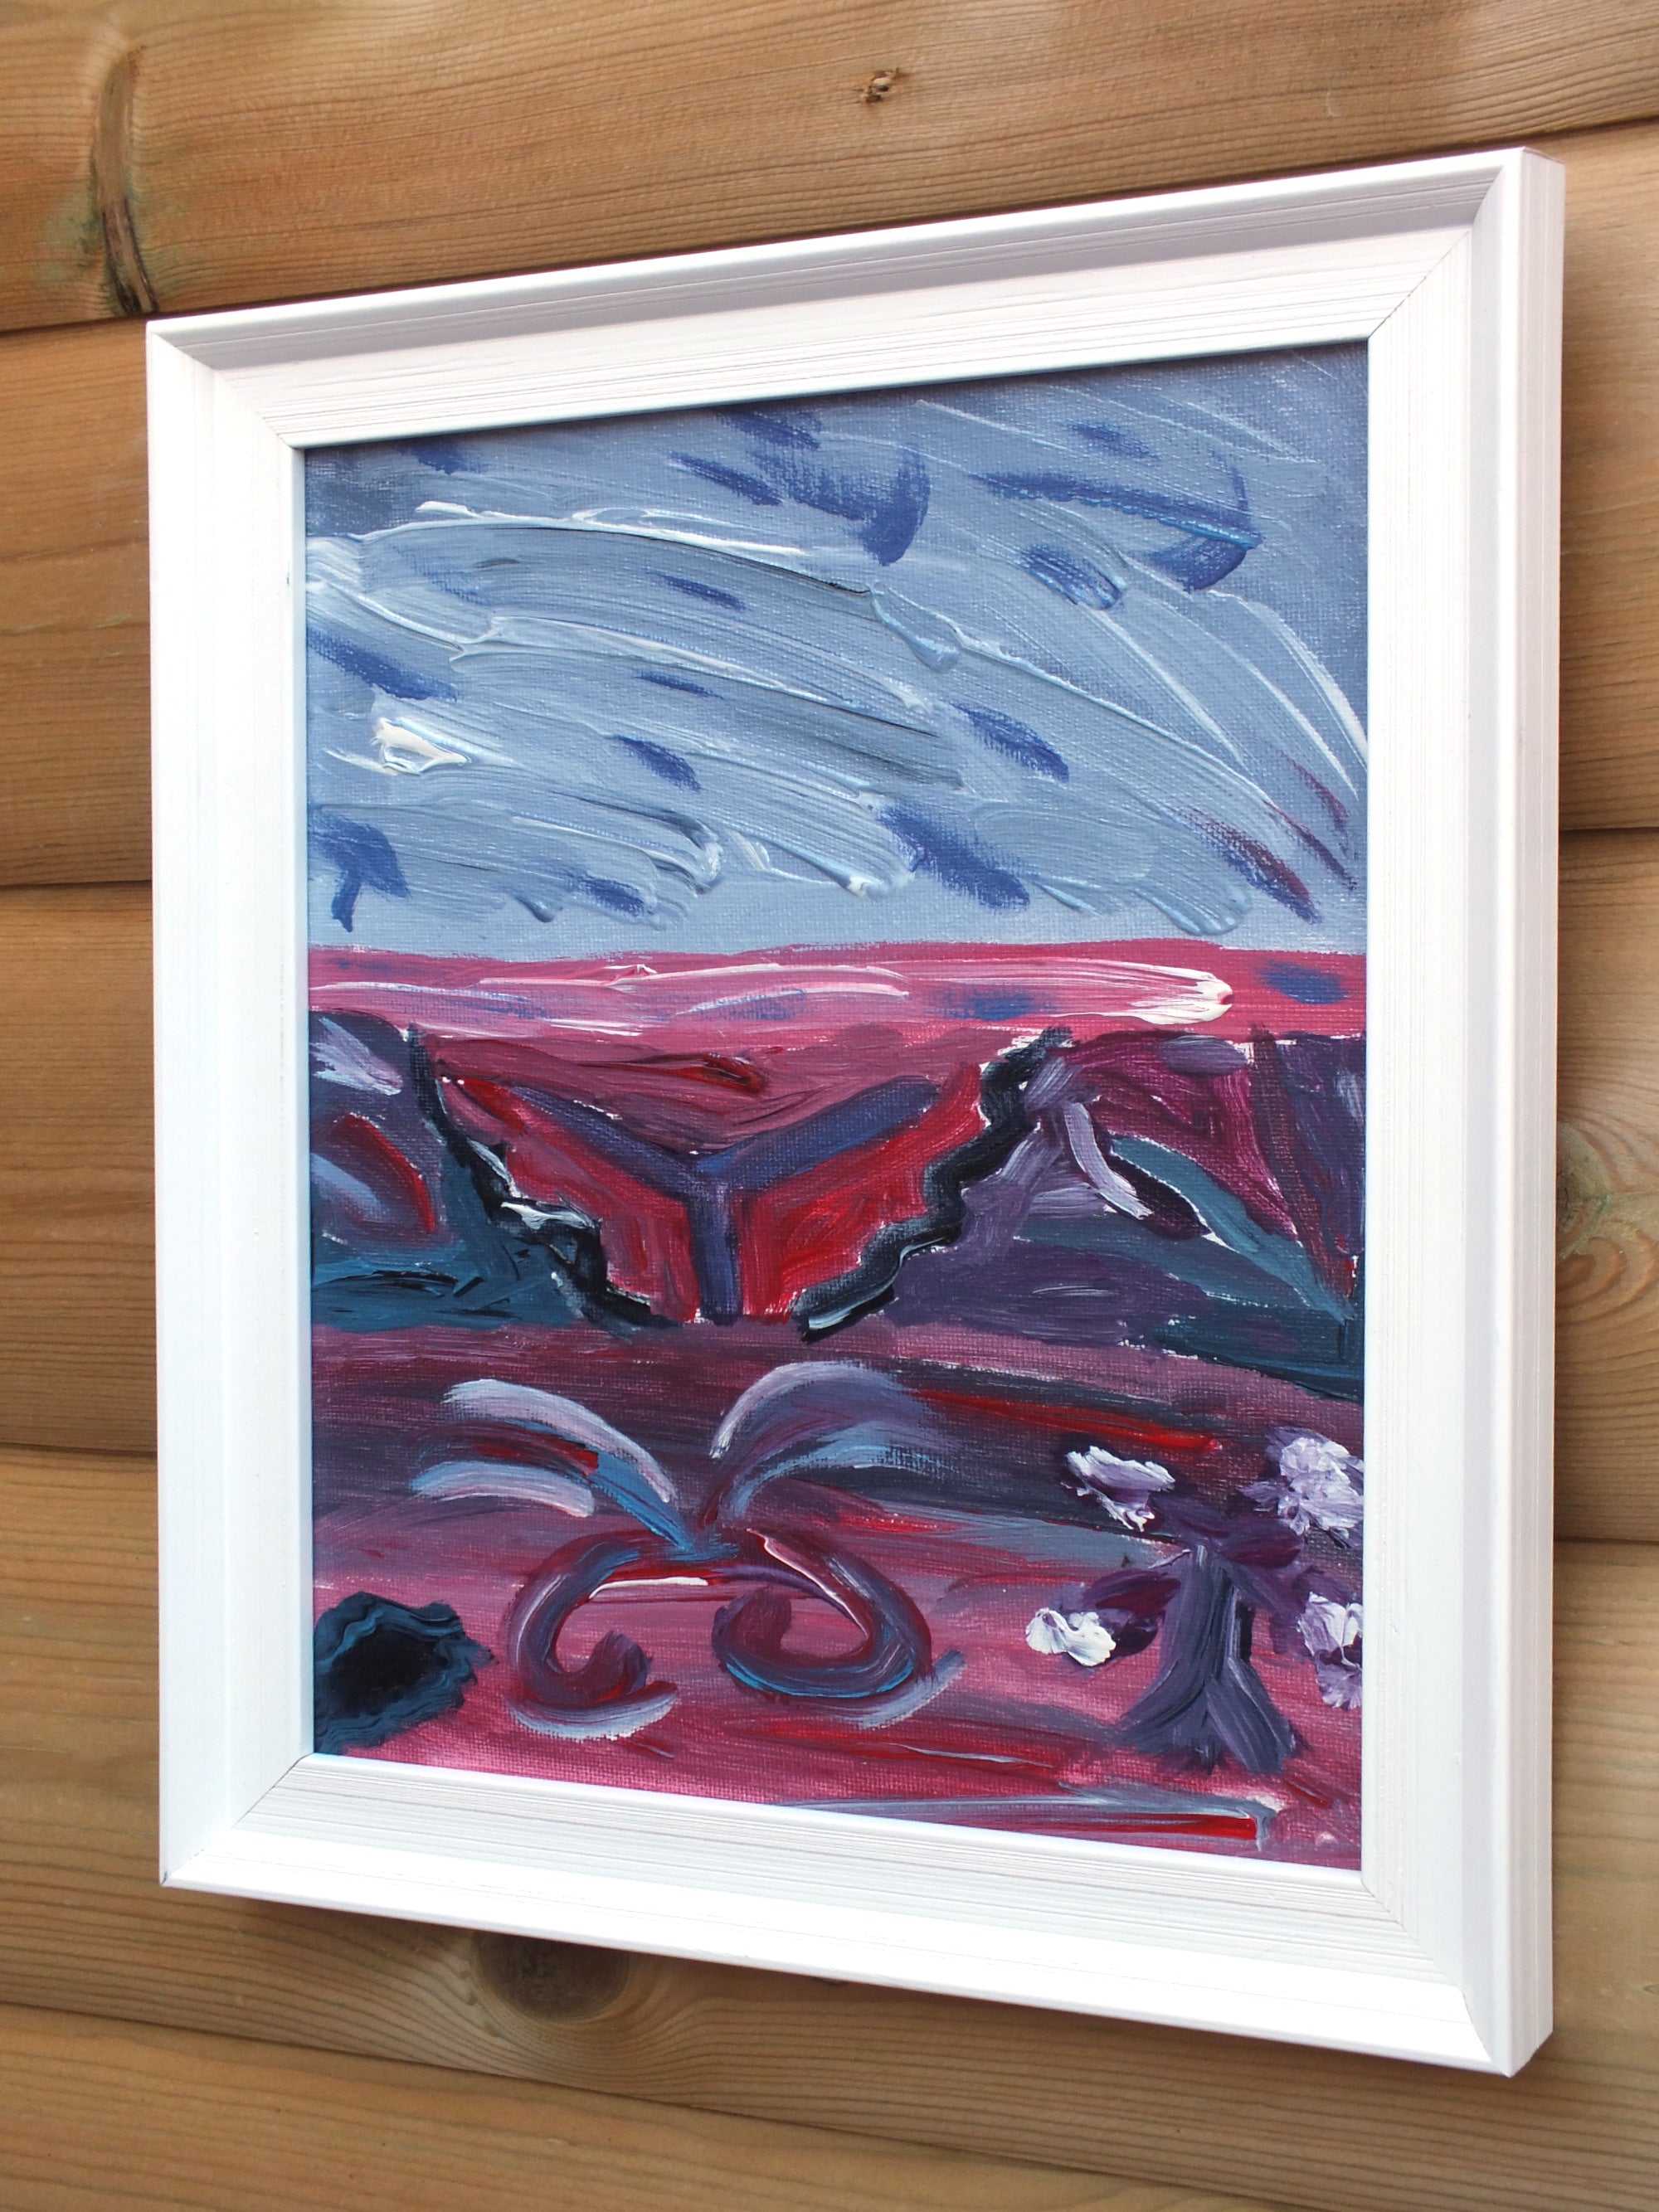 Original Organic Abstract Painting - A Realm Within Us, Framed, Fraser Lucas